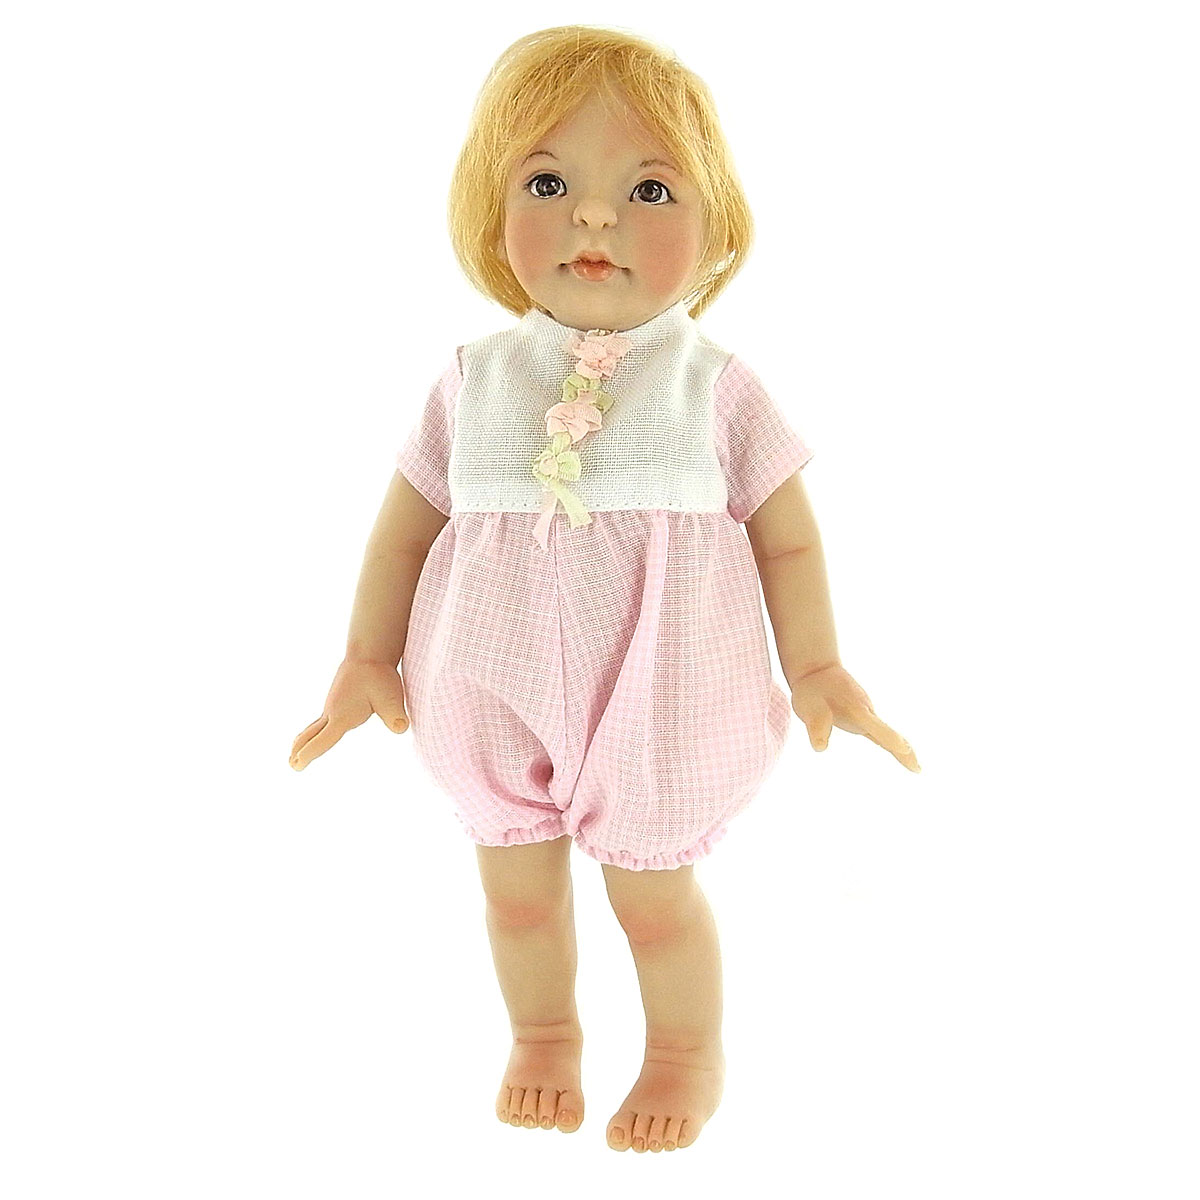 M02383x2 MOREZMORE 2 lb Living Doll LIGHT Polymer Oven-Bake Clay Super  Sculpey